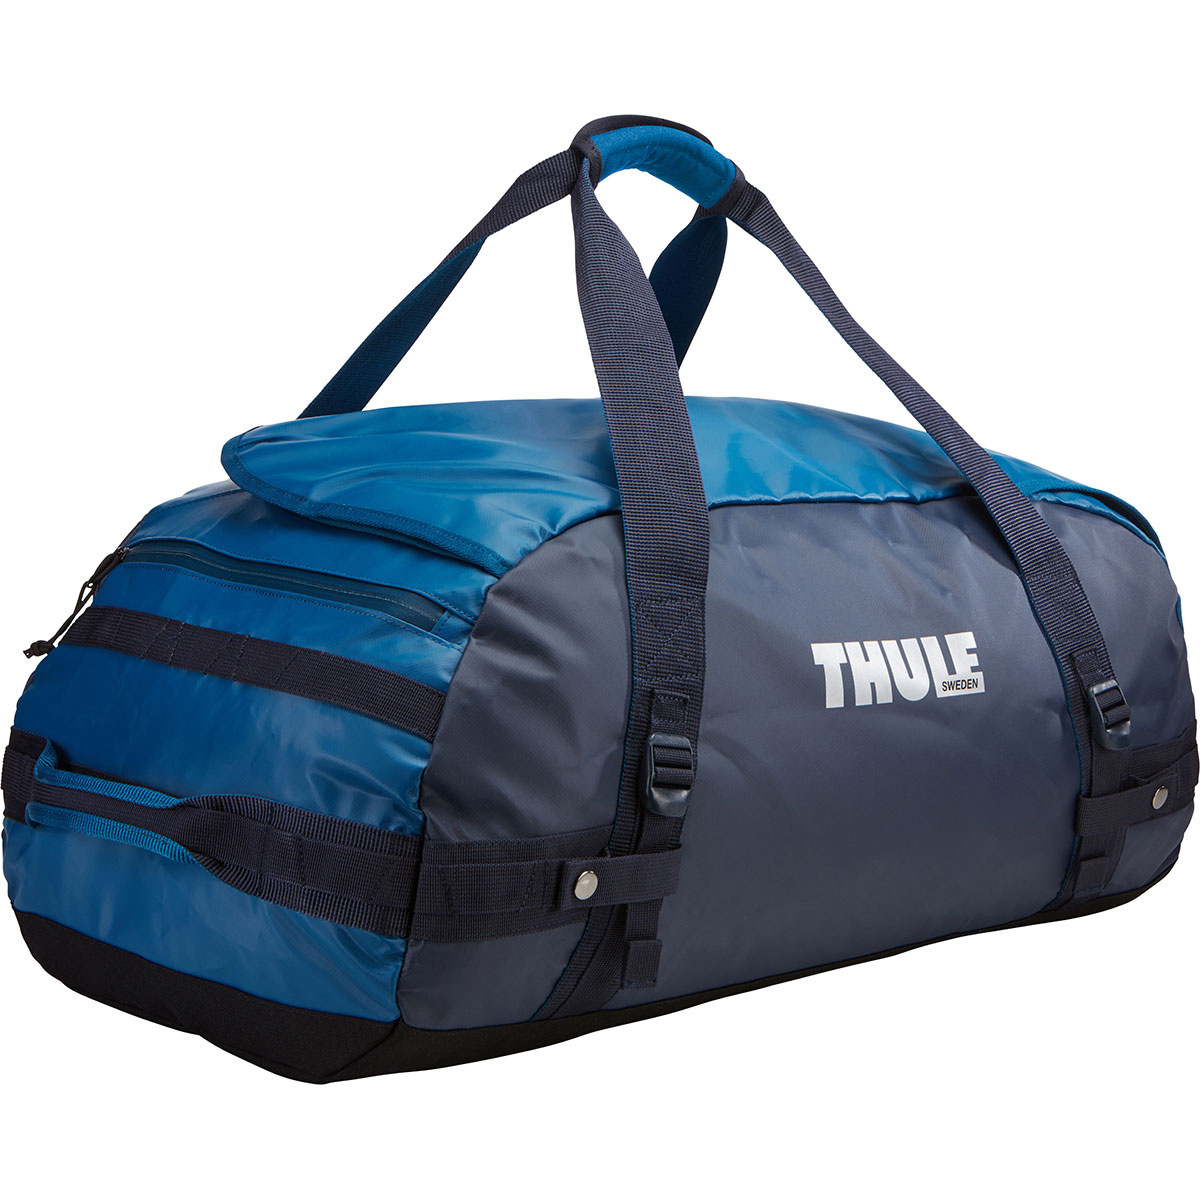 Image of Thule Chasm Duffle